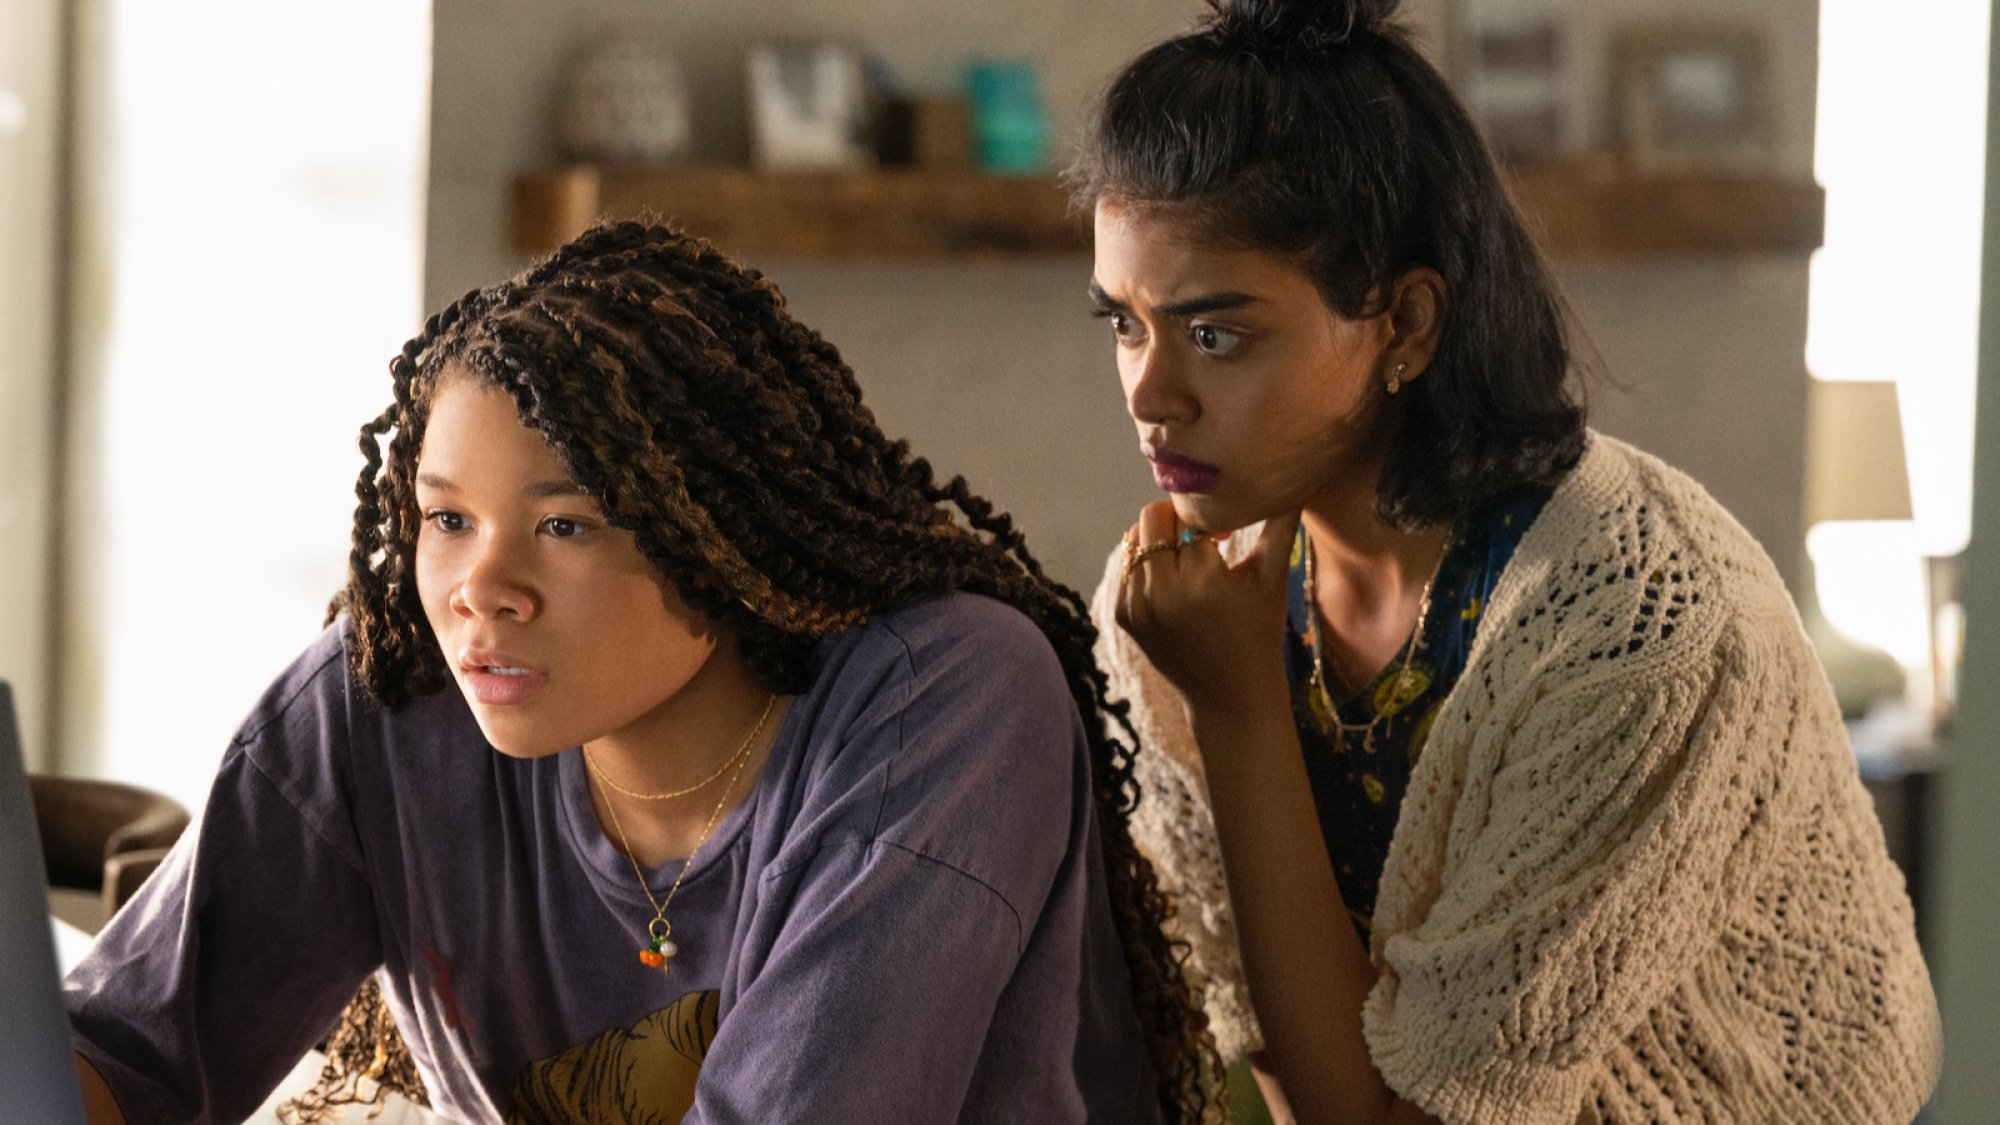 Storm Reid and Megan Suri look worried reading a computer screen in the film "Missing."